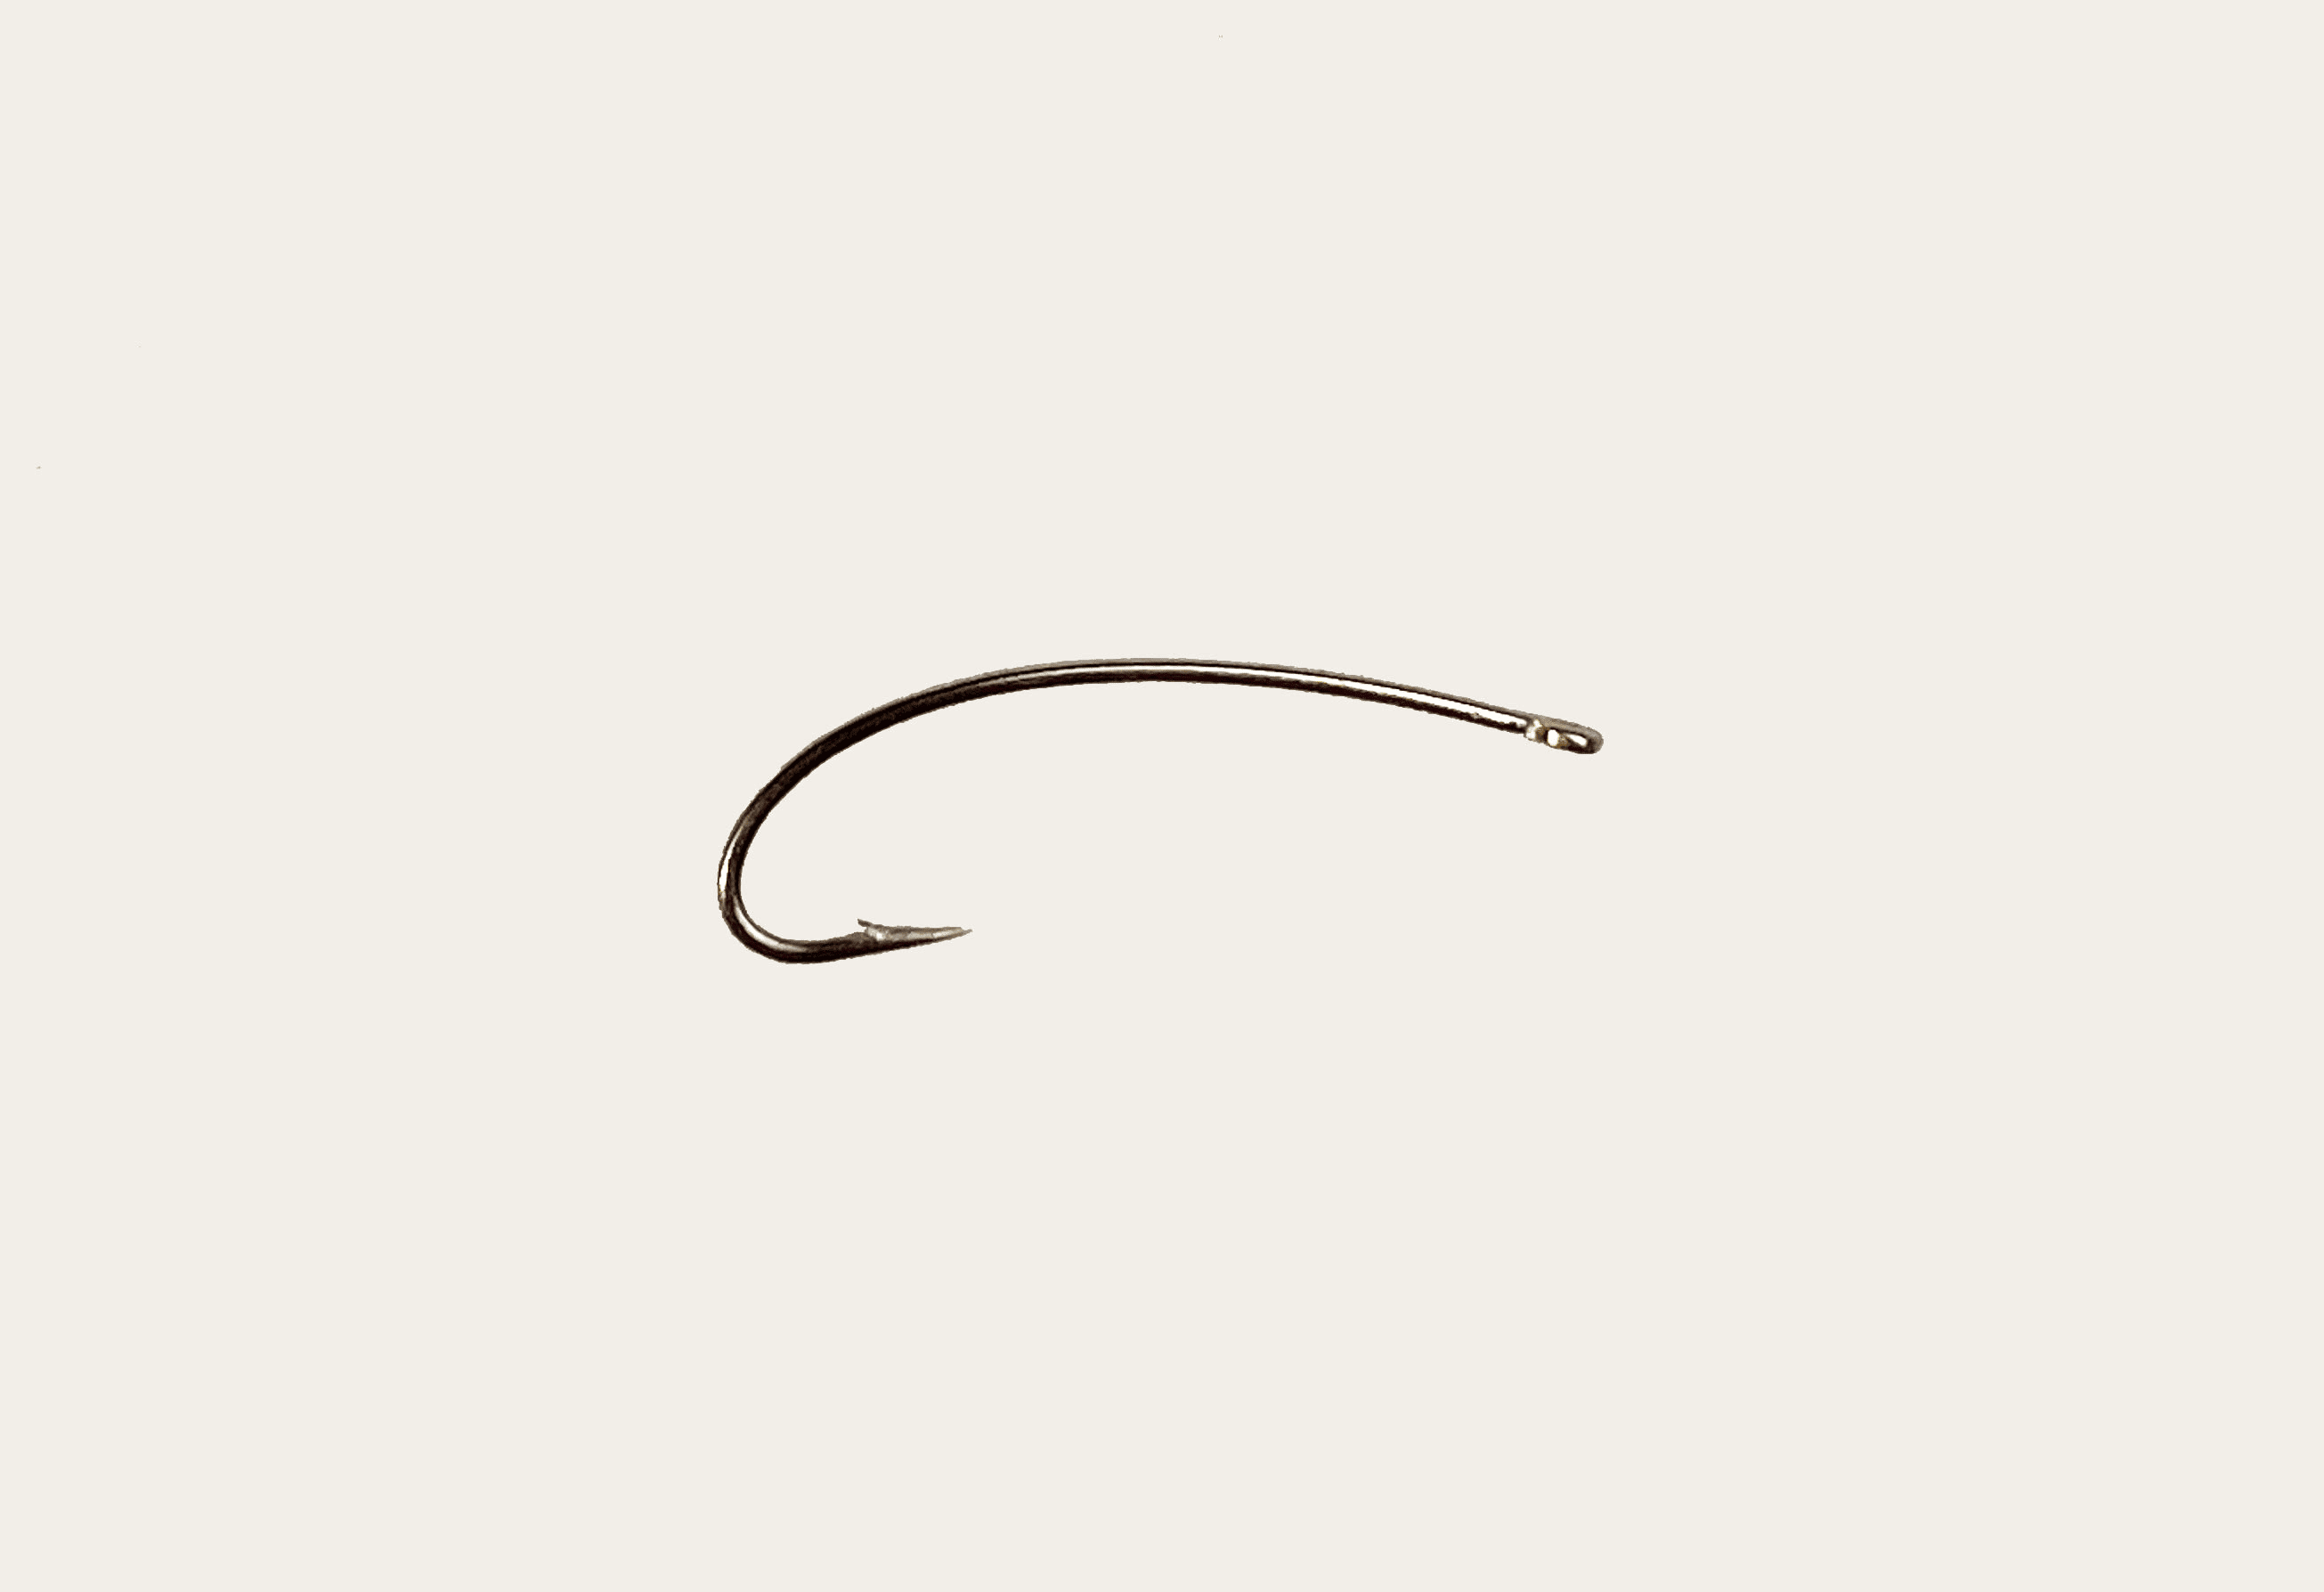 10 Size Wide Mouth Iseama Carp Fly Tying Hook Assortment From Liliooo,  $7.08